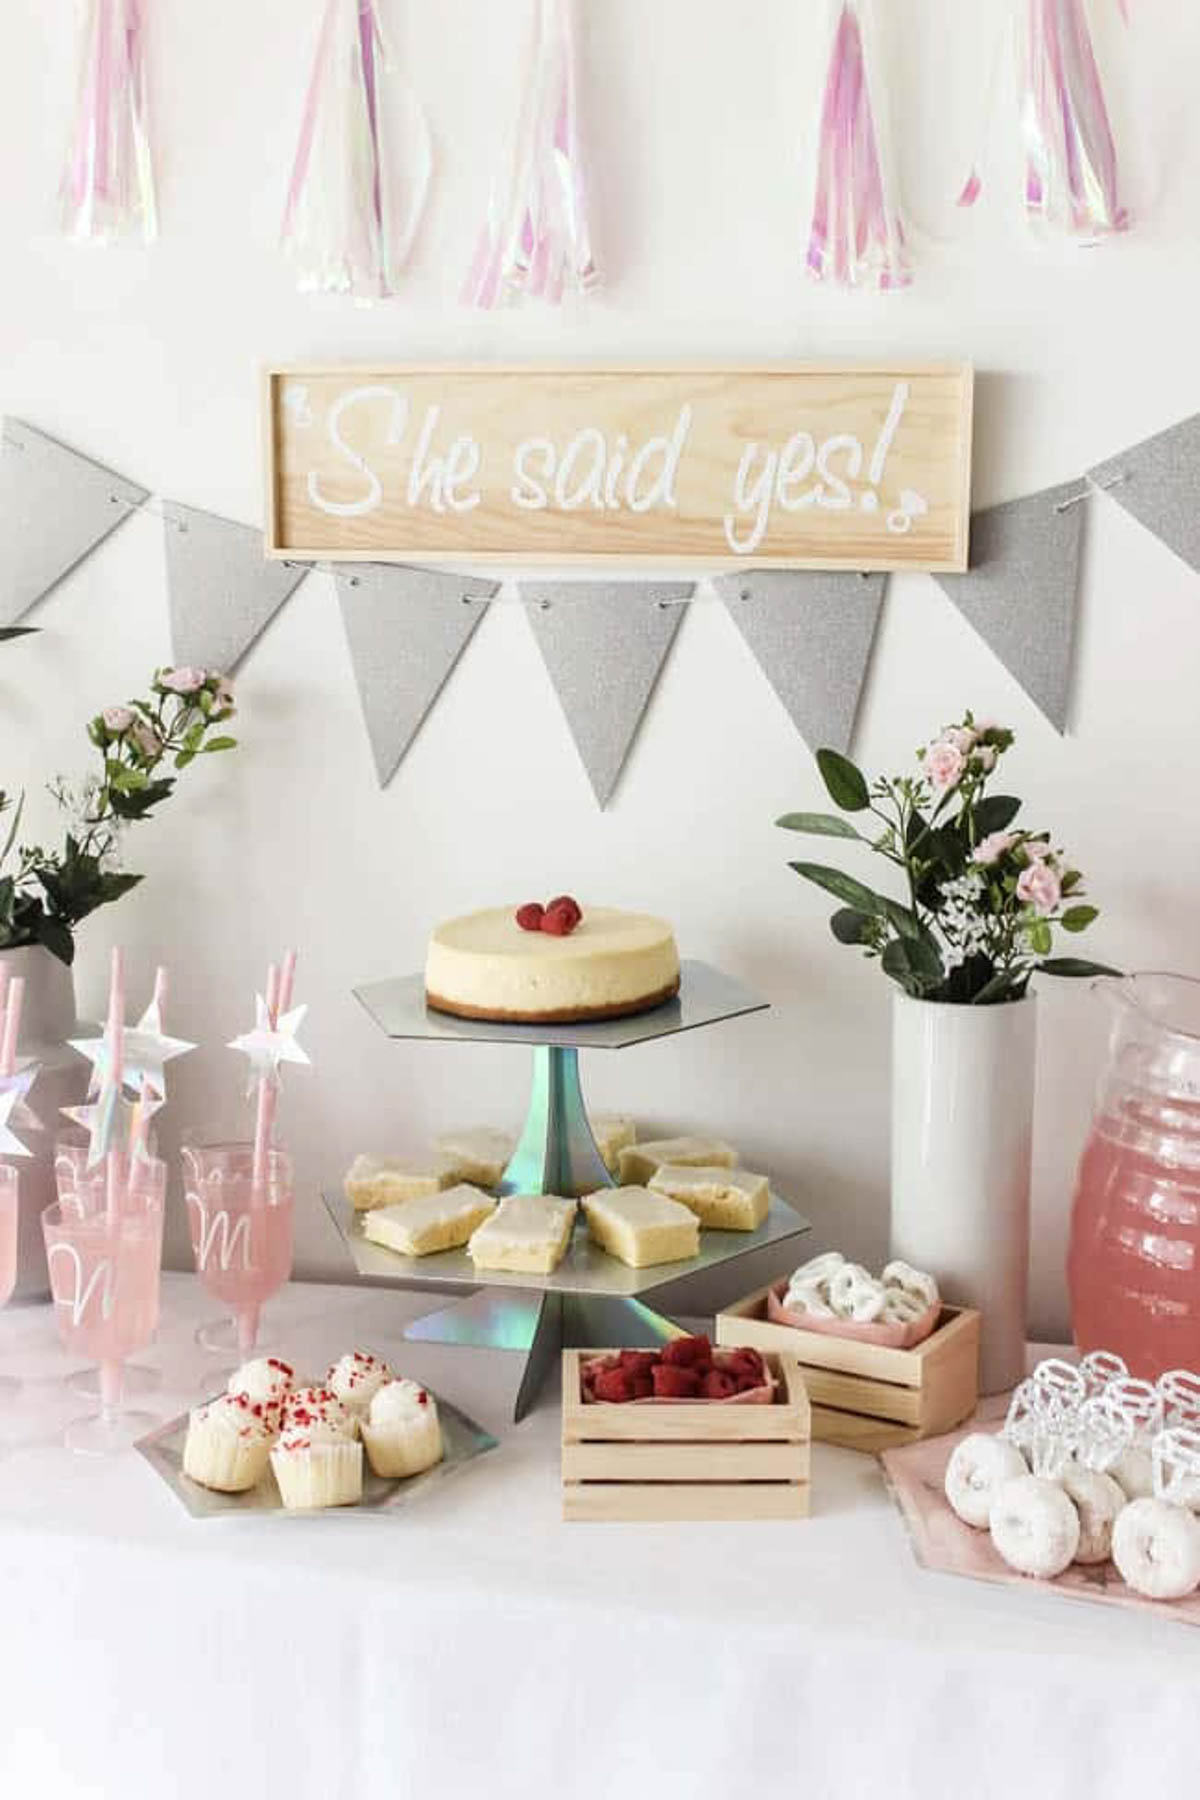 Decorated dessert table for a bridal shower